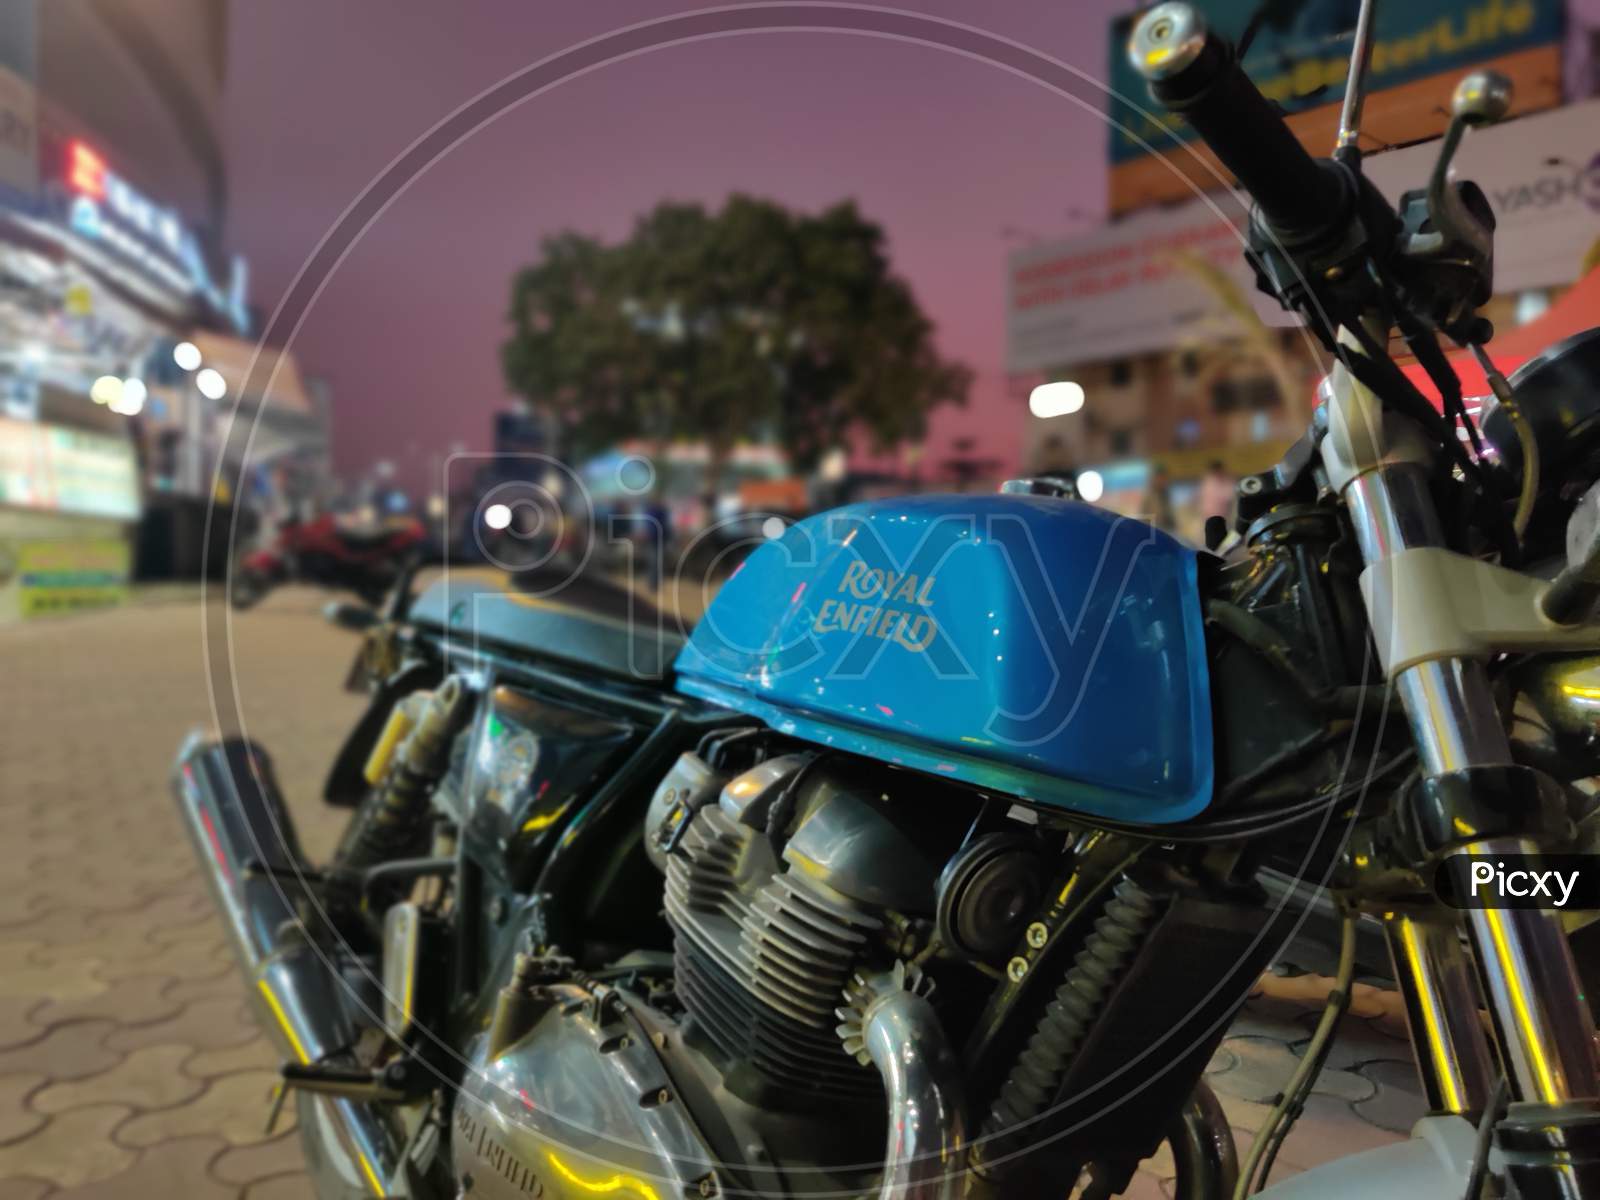 Sunset with a Royal Enfield!